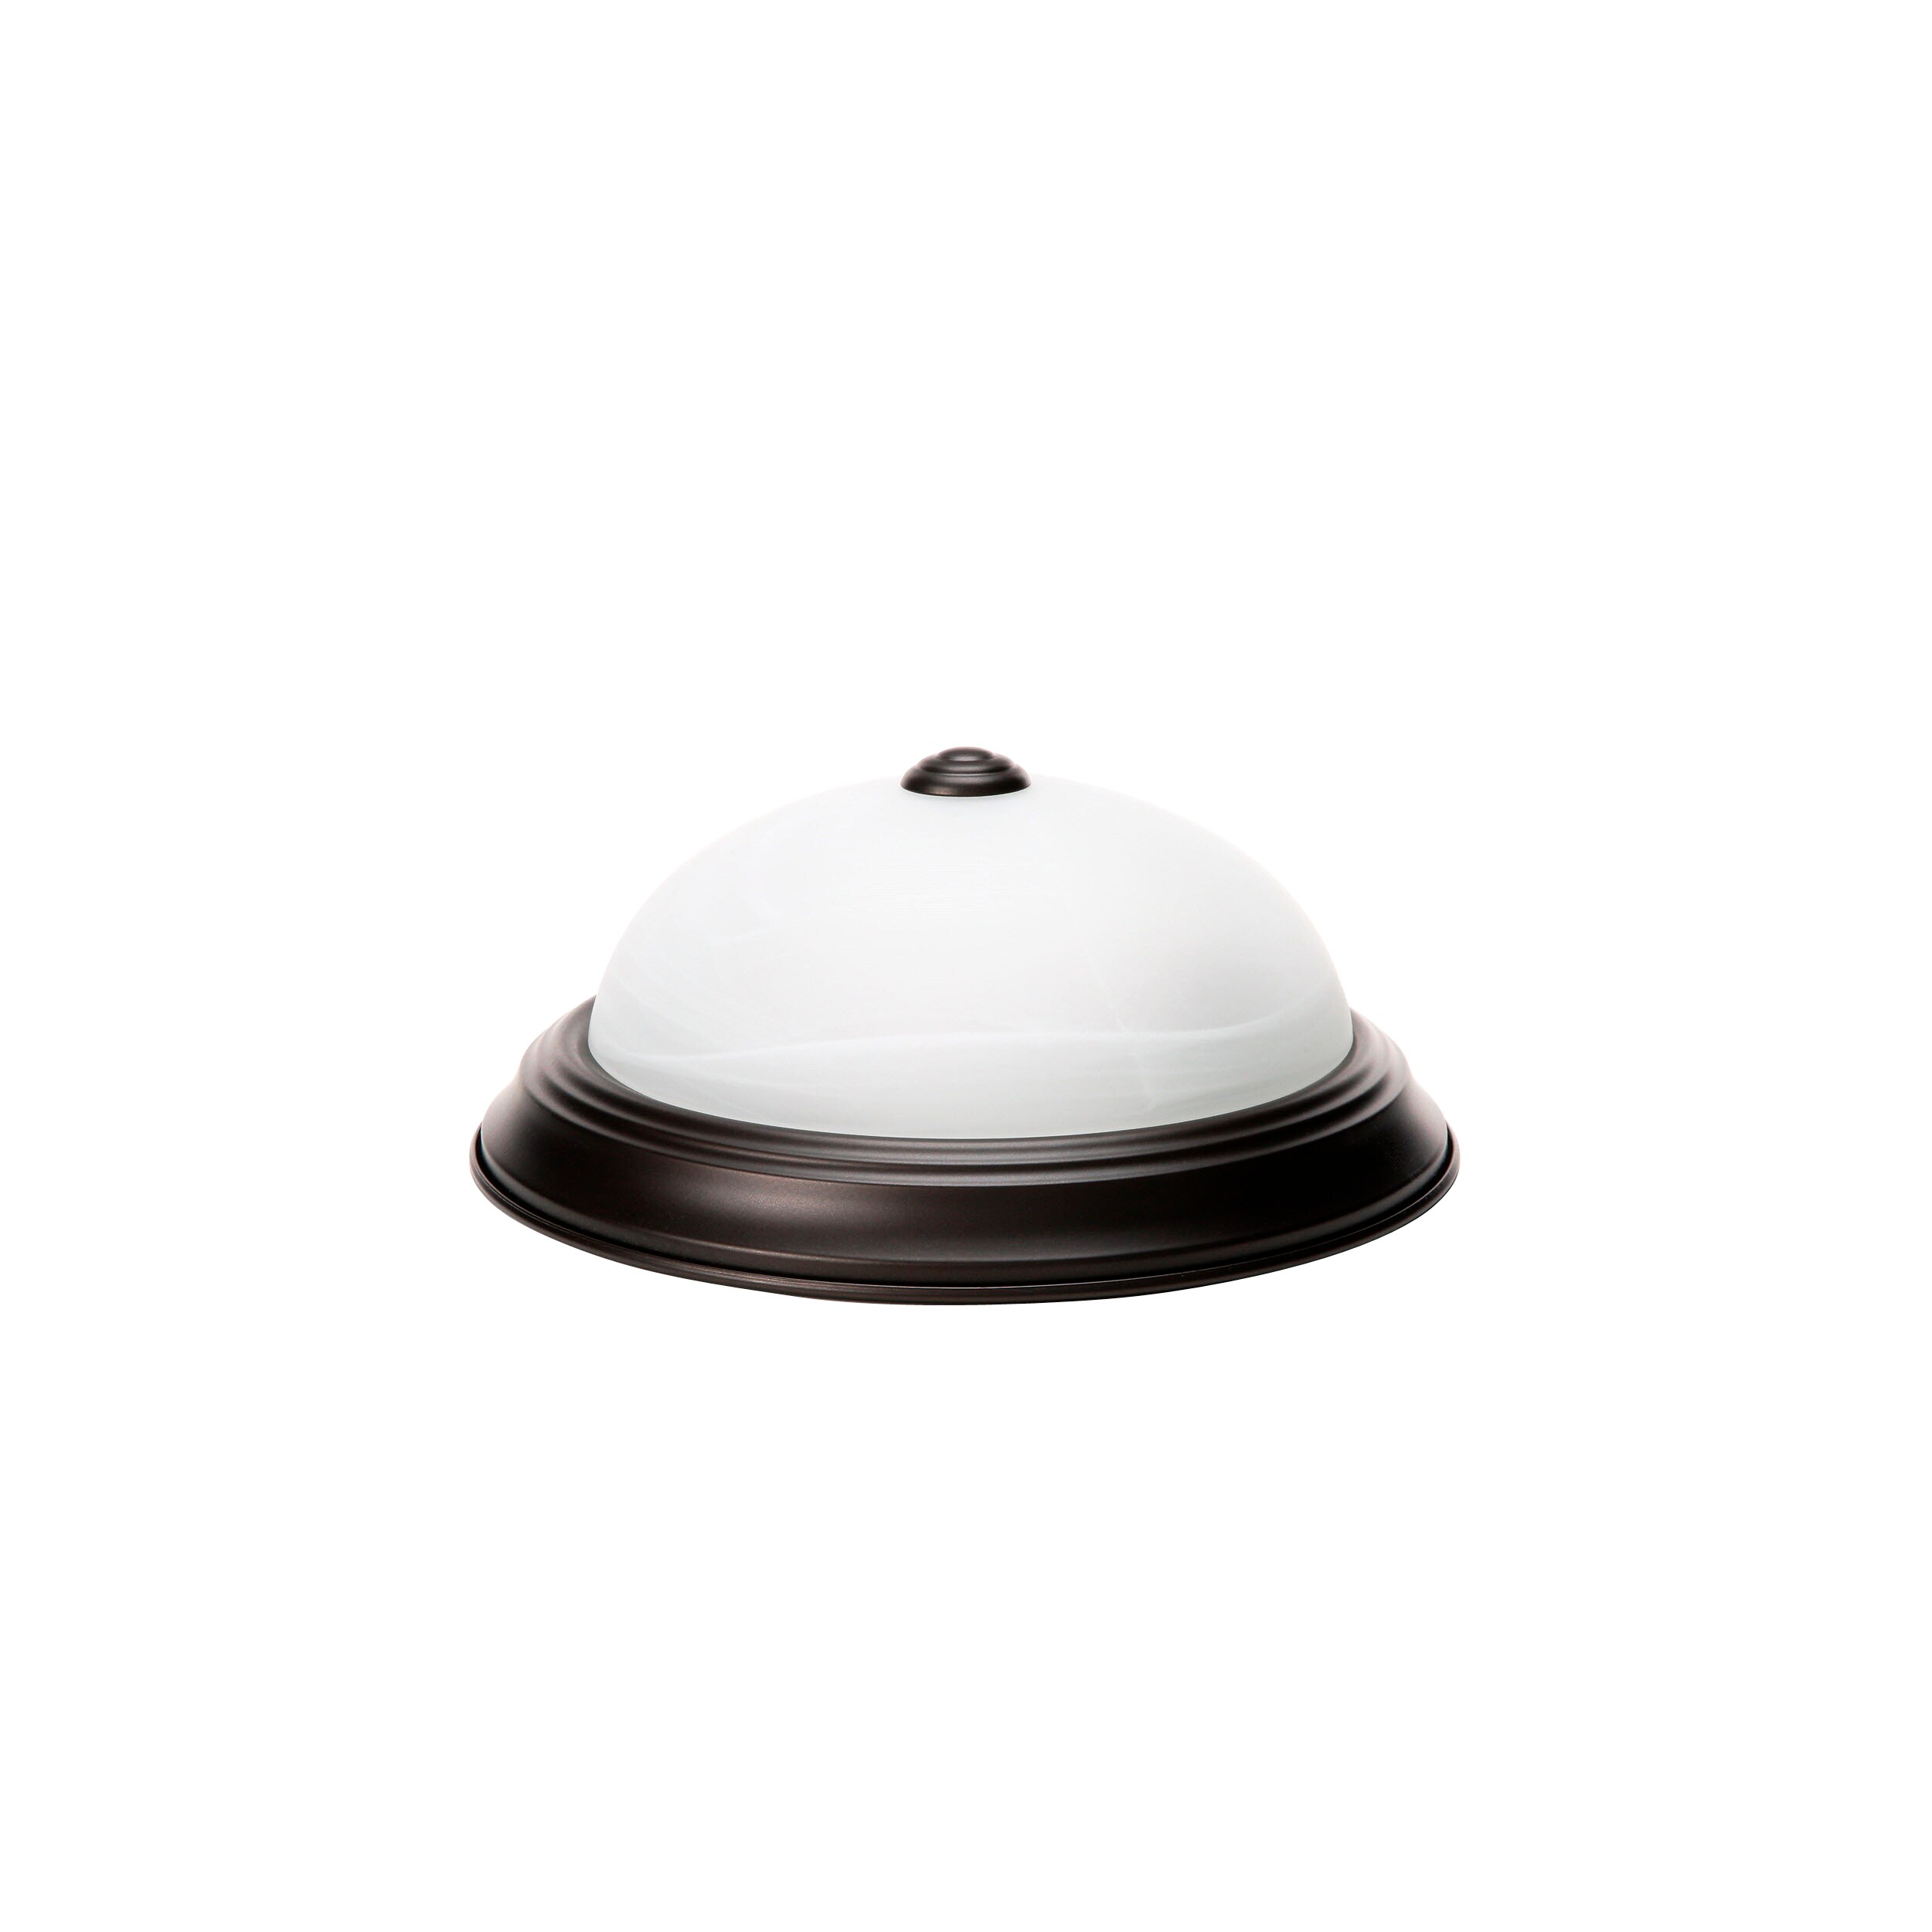 Designers Fountain 1245M-ORB Ceiling Lights Oil Rubbed Bronze